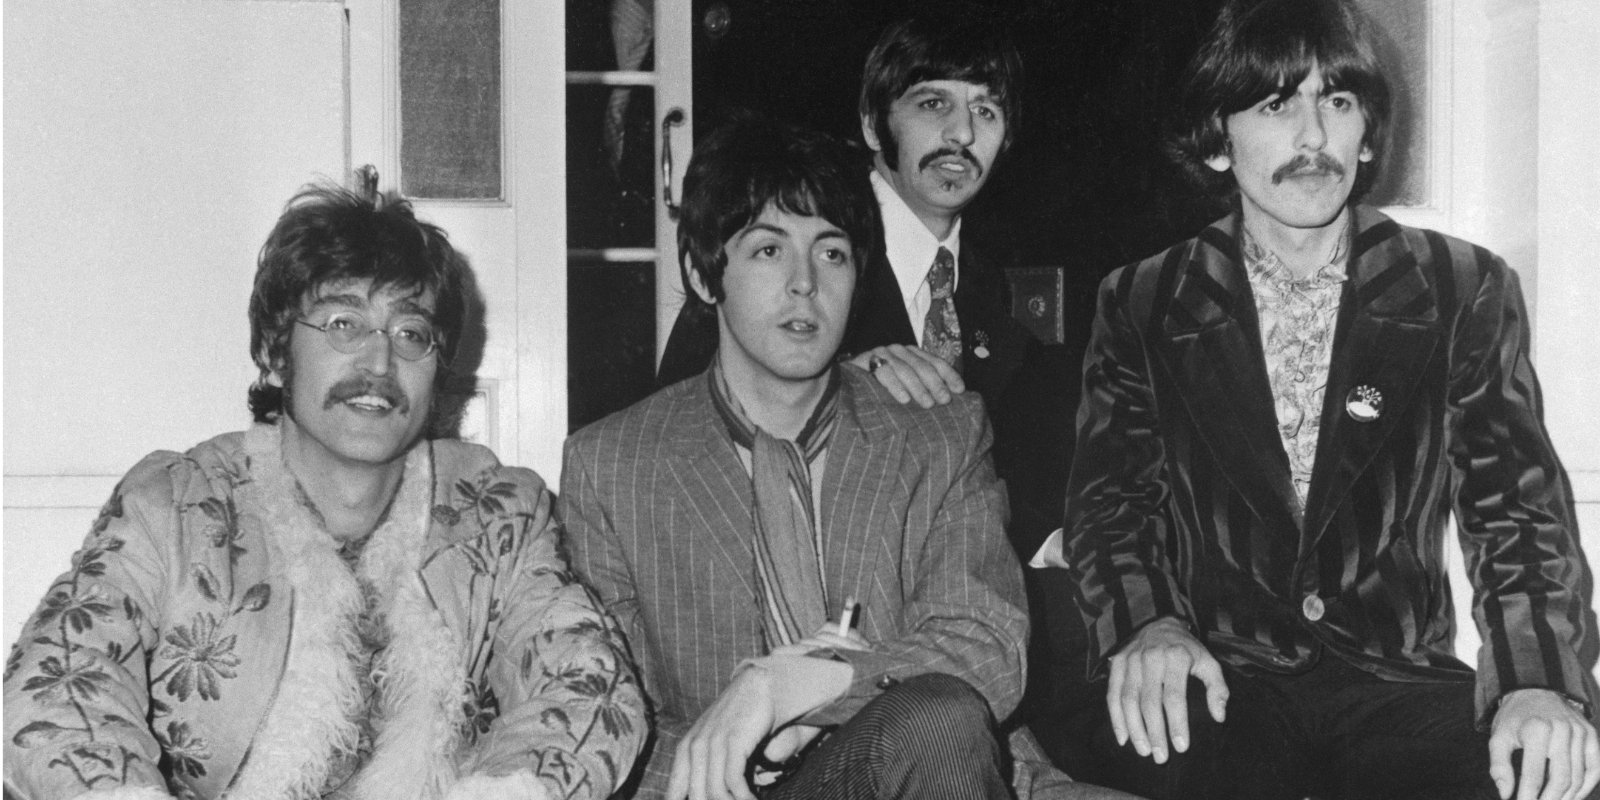 The Beatles at their manager Brian Epstein's home, 24 Chapel Street, London, for a press meeting and pre-listen to their upcoming album Sgt. Pepper's Lonely Hearts Club Band.